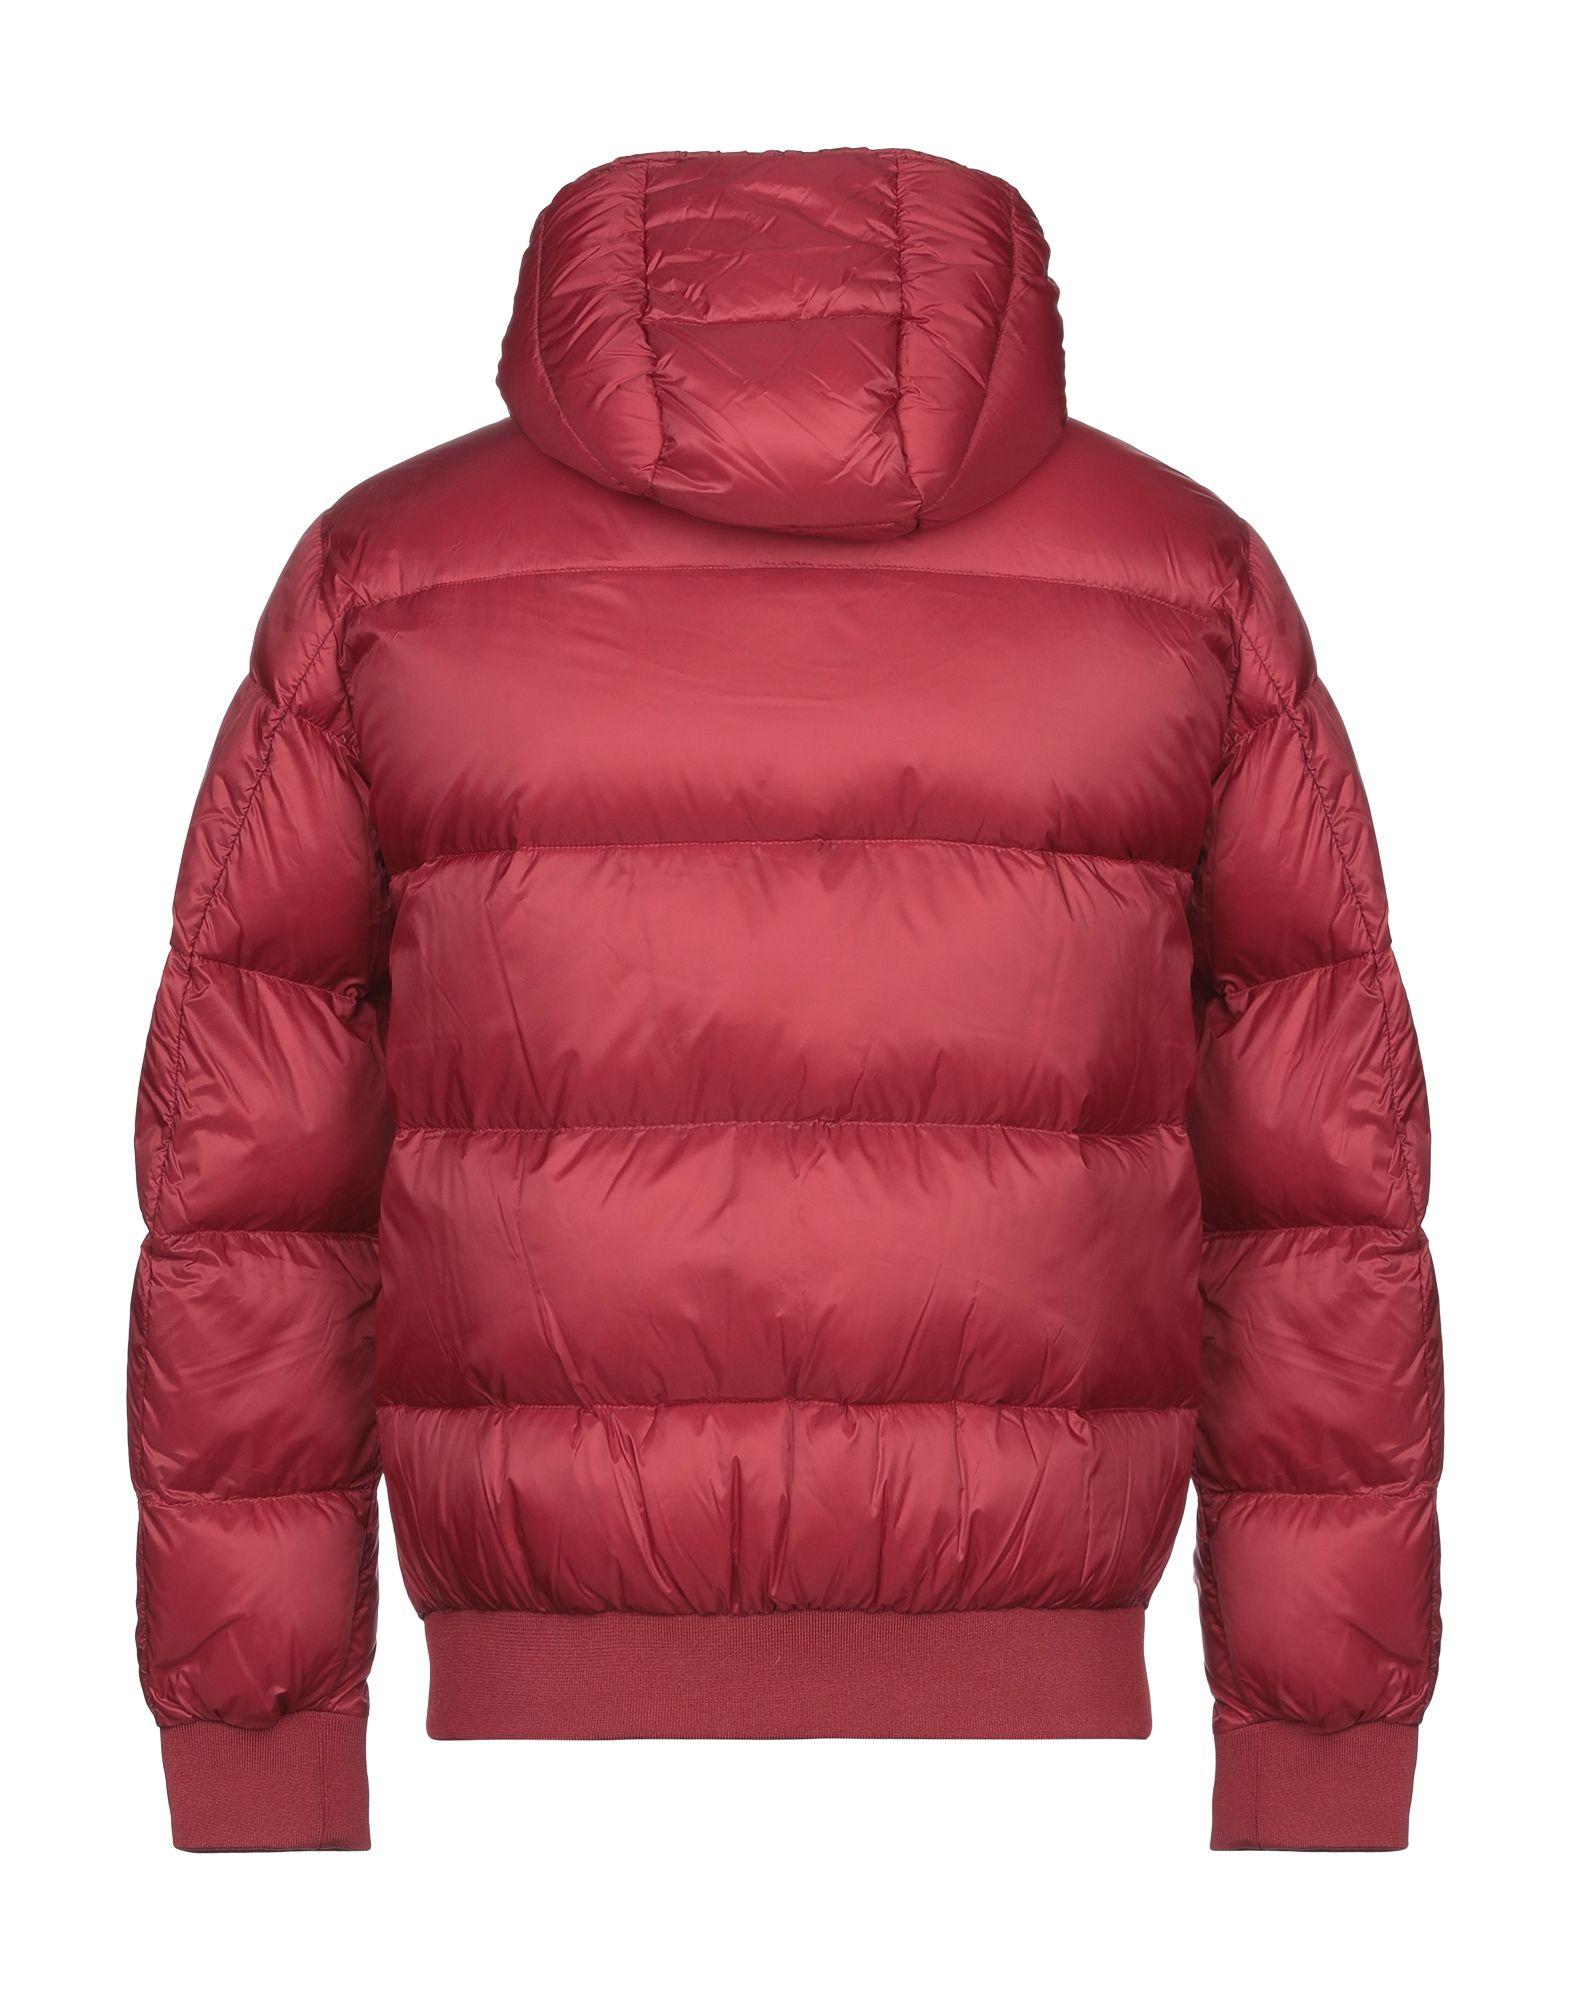 Armani Jeans Synthetic Down Jacket in Red for Men - Lyst